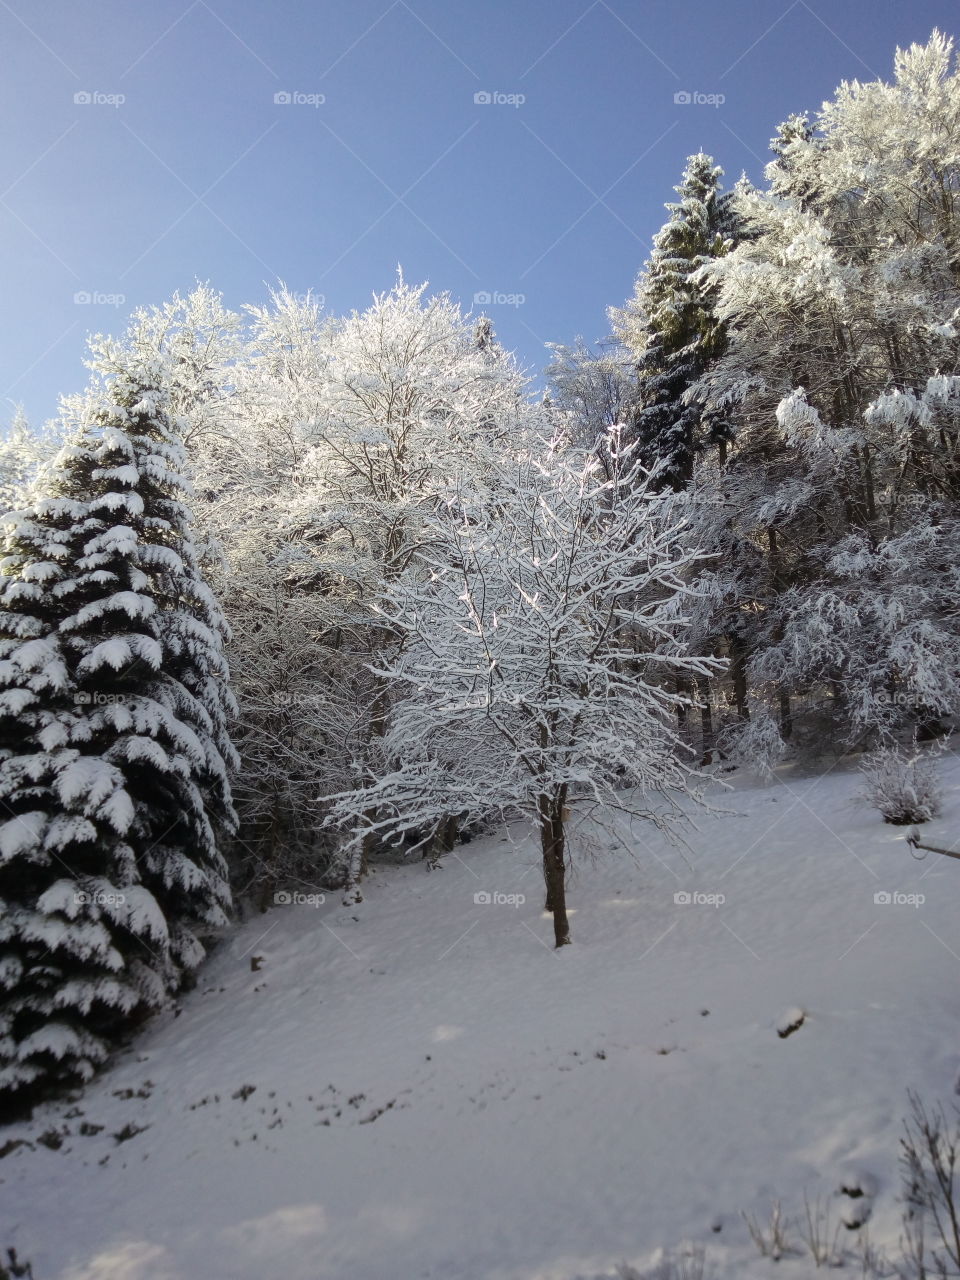 Bad Wildbad in winter